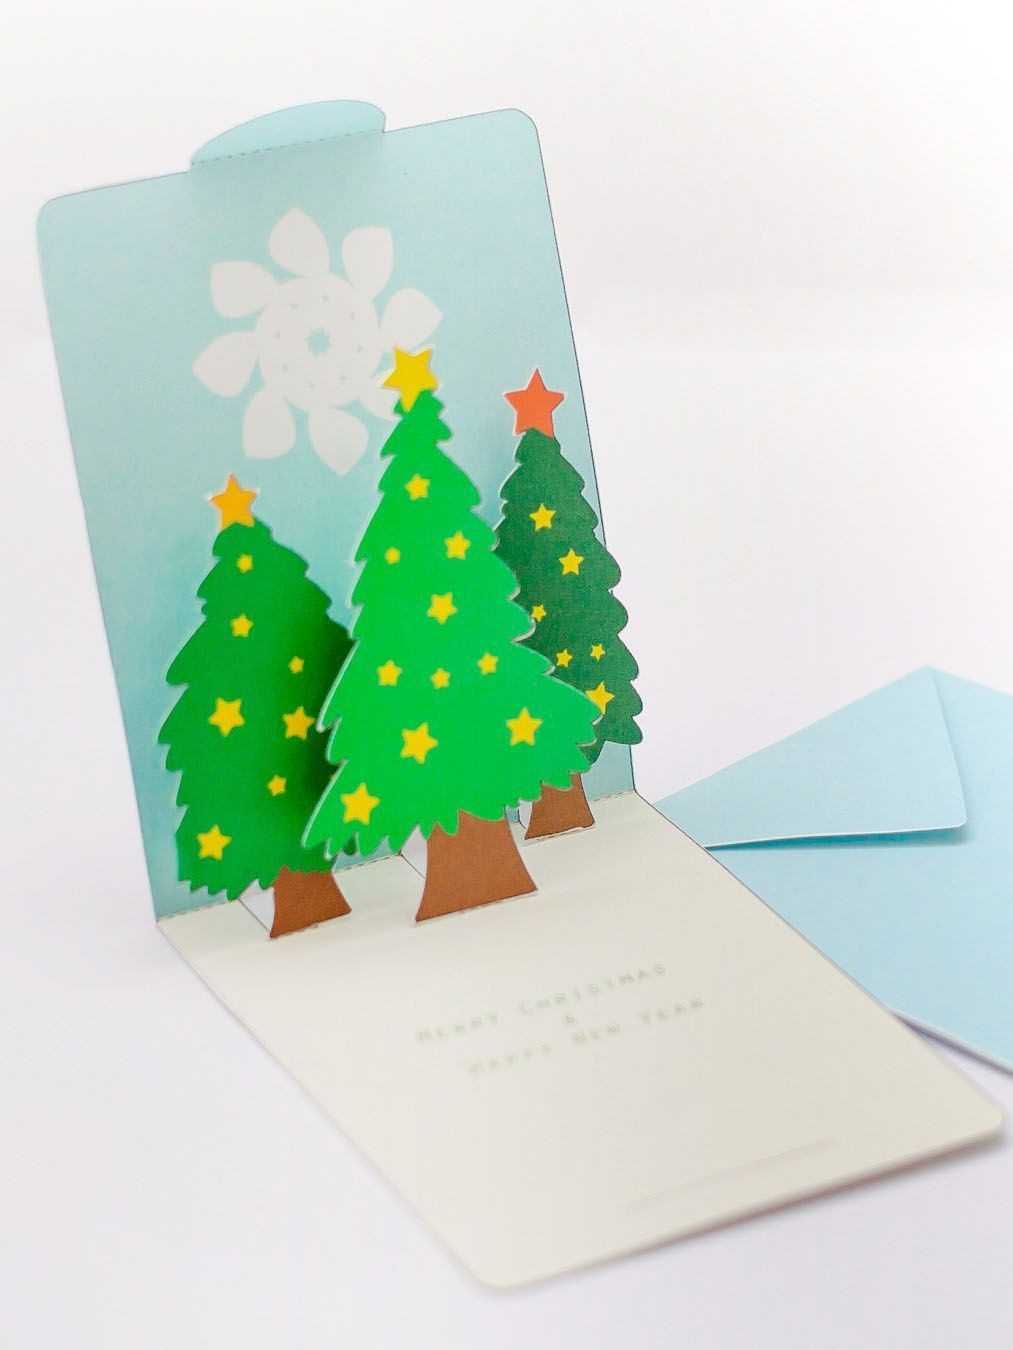 Tree Papercraft Free Pop Up Card Template Mookeep Origami Regarding Pop Up Tree Card Template